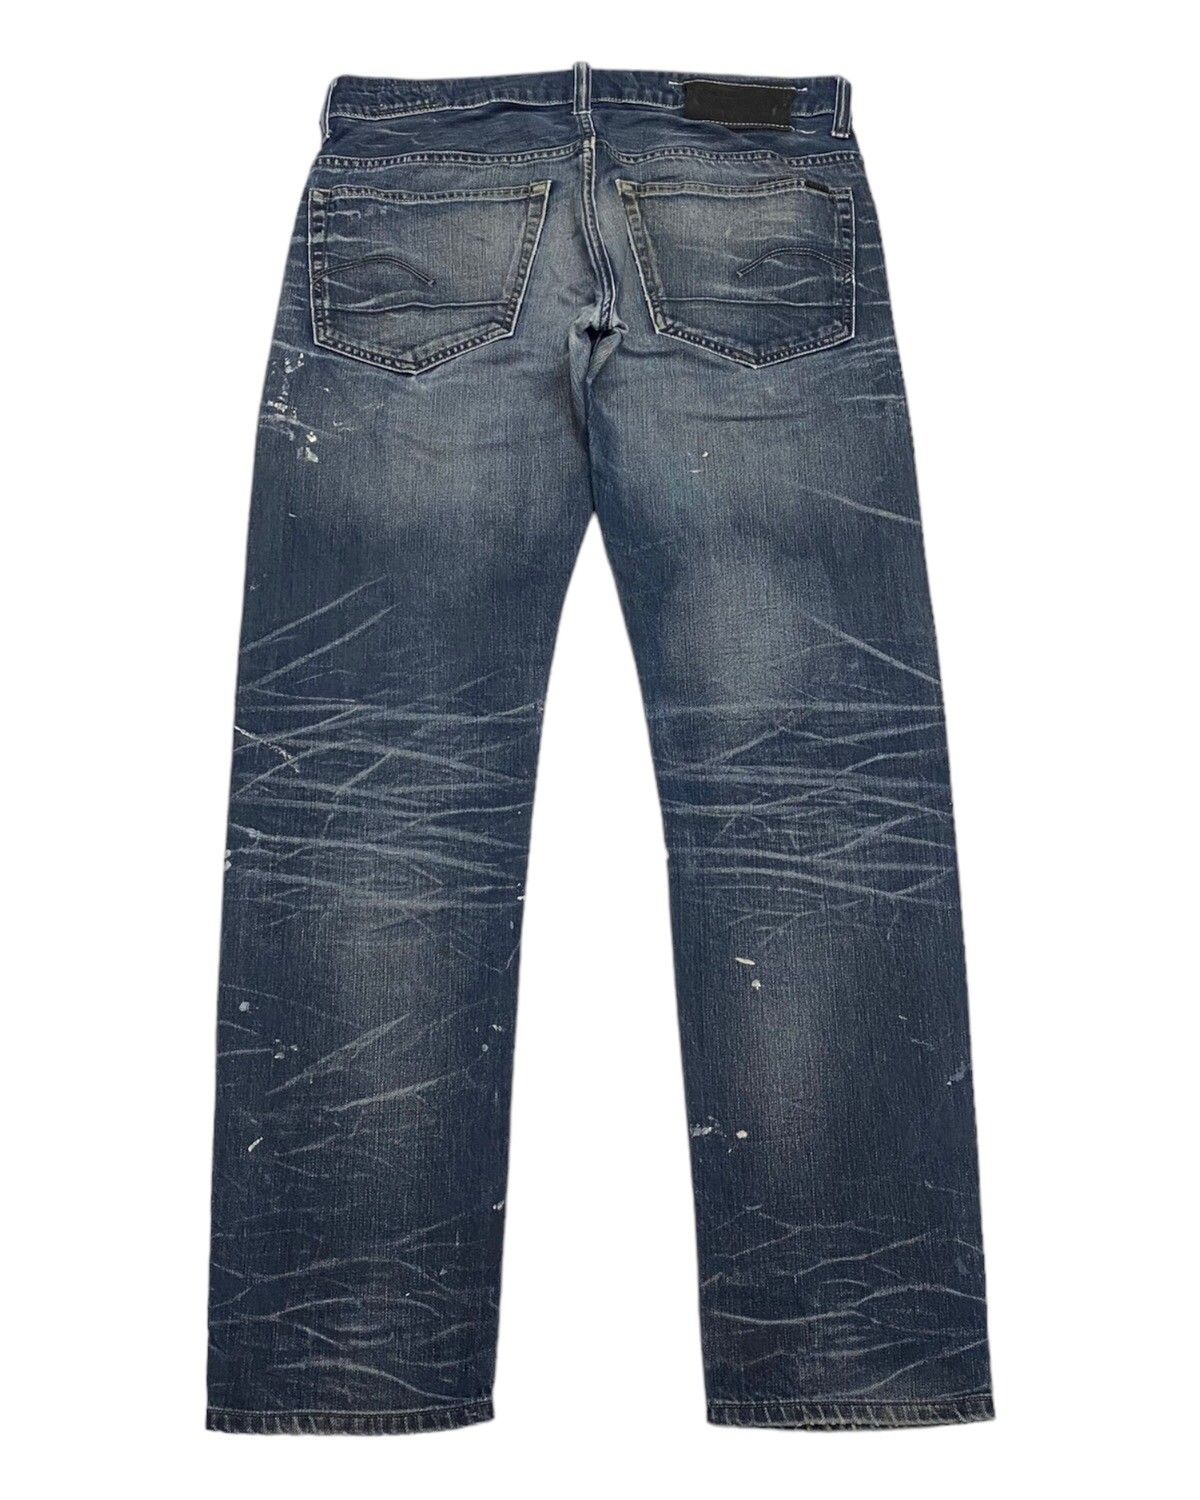 Archival Clothing - G-STAR RAW DISTRESSED PAINTED 3301 UNDERCOVER STYLE JEANS - 2